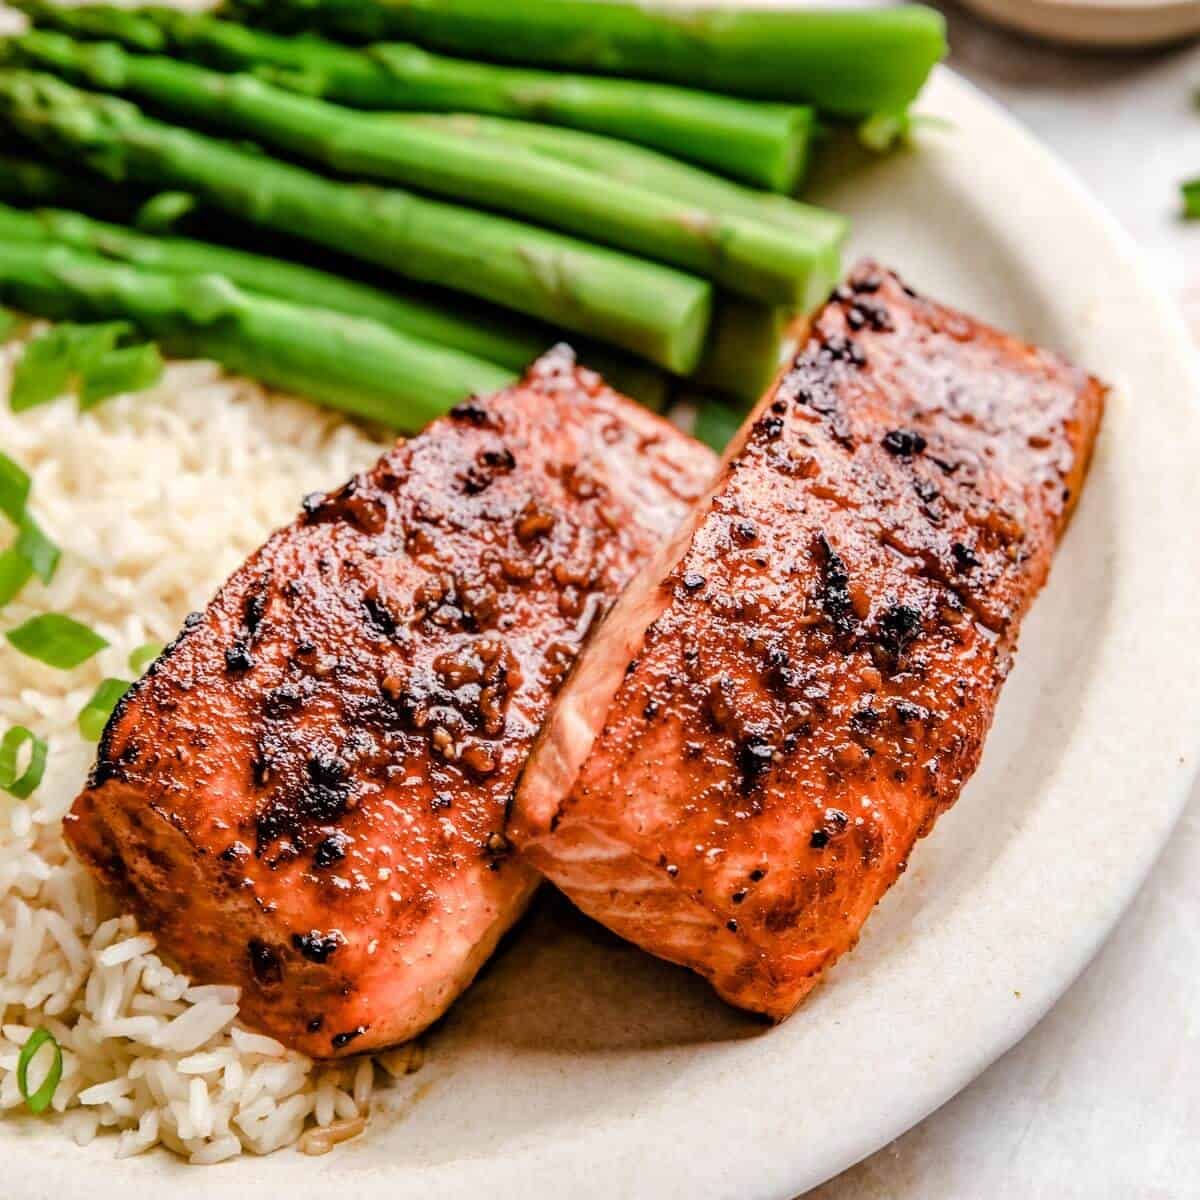 two honey garlic salmon filets on a white plate next to asparagus and rice.